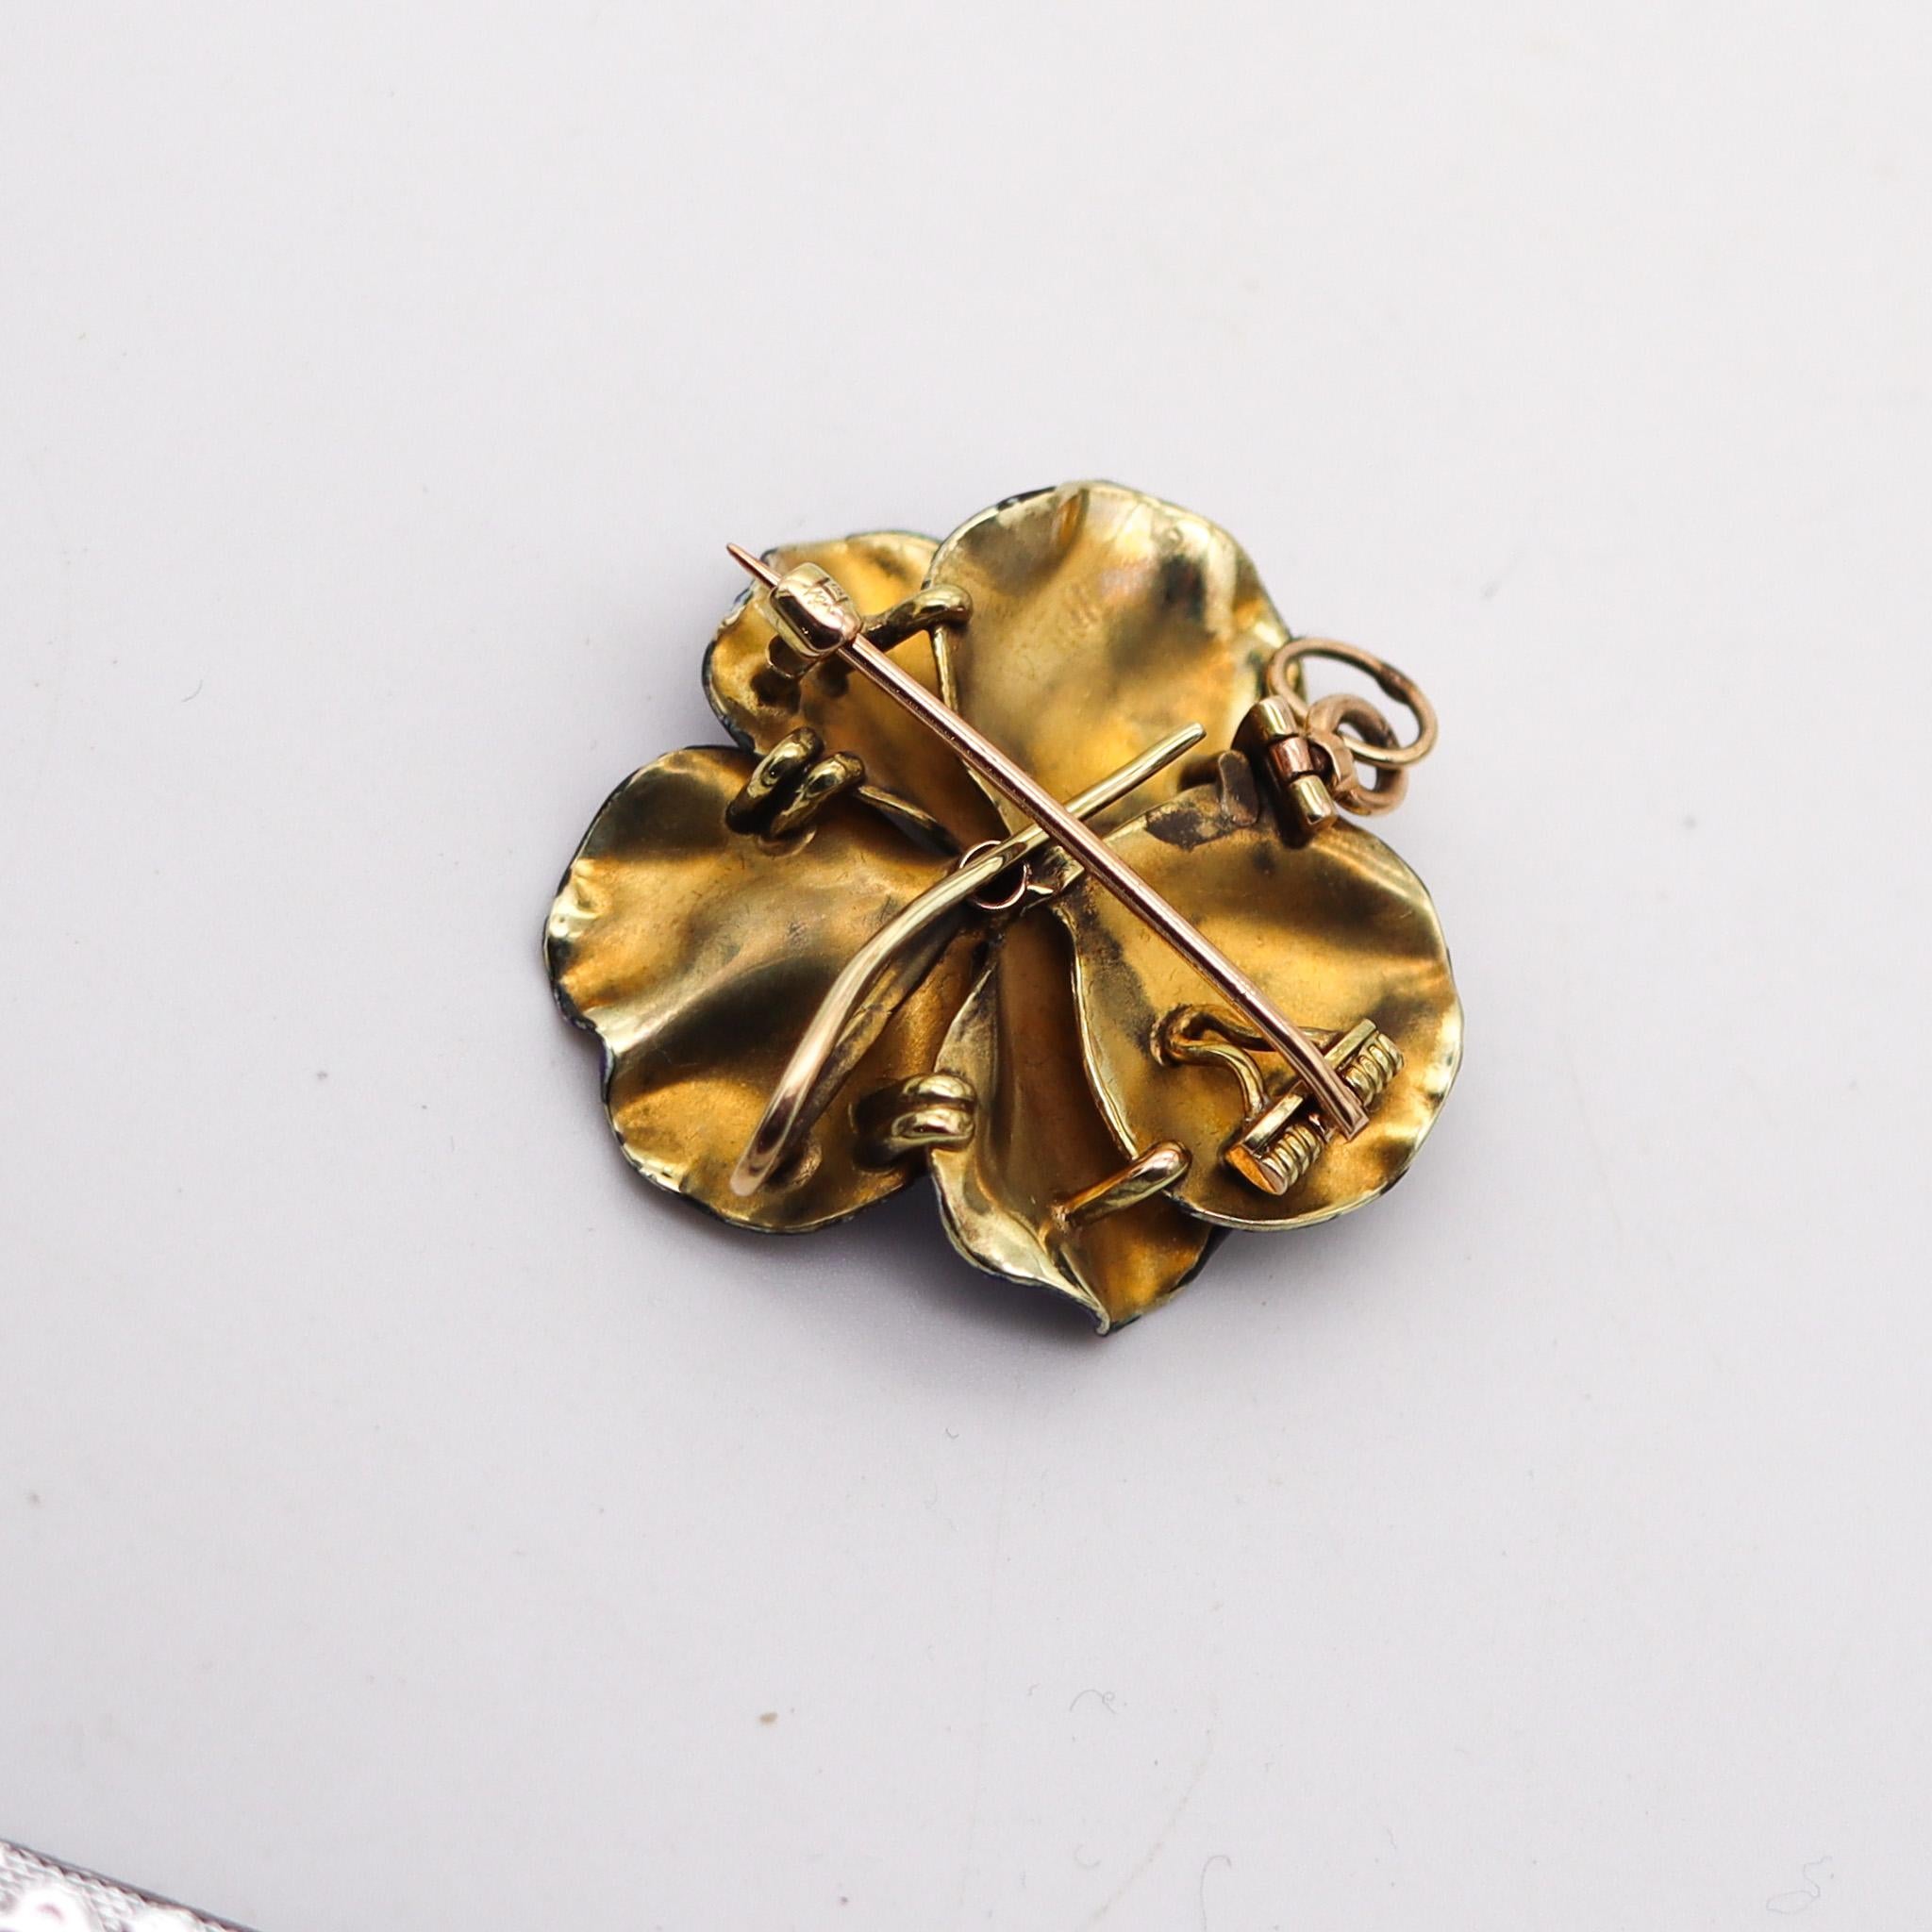 Art Nouveau Hedges & Co. 1900 Enameled Pansy Pendant Brooch In 14Kt Gold With Diamond For Sale